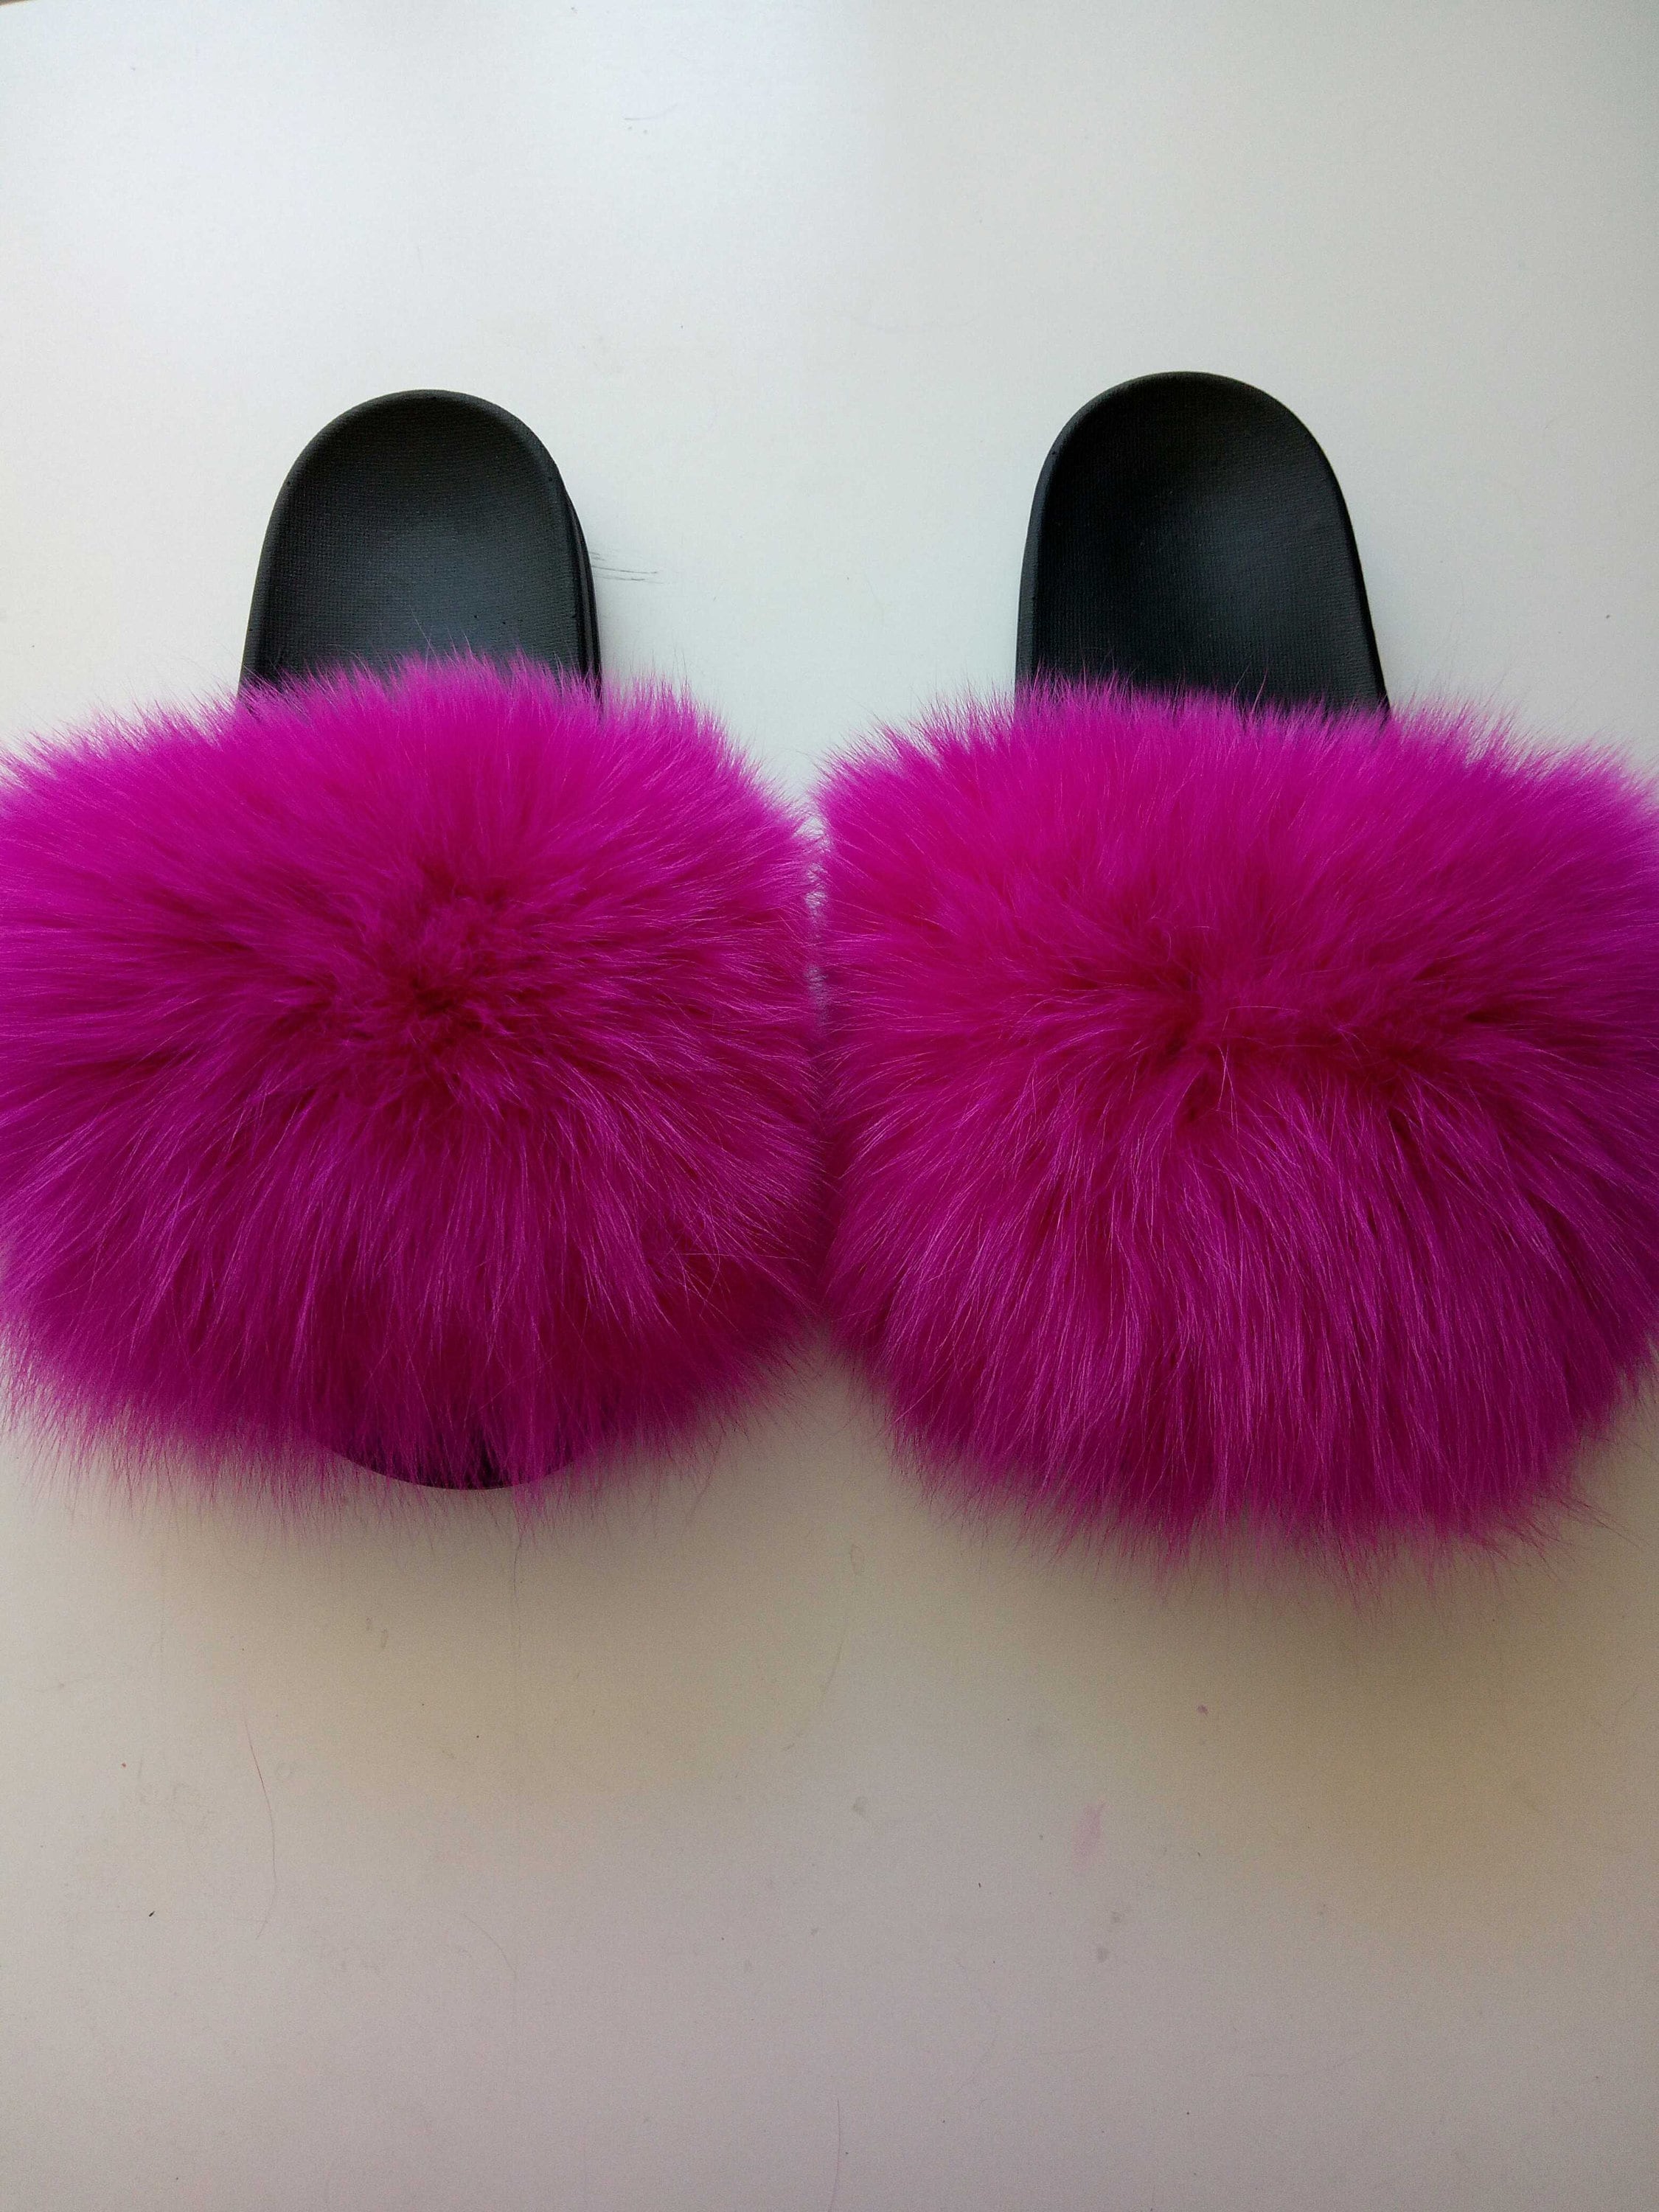 Customize Furry Slide Sandals for Woman Fluffy Slippers | Etsy